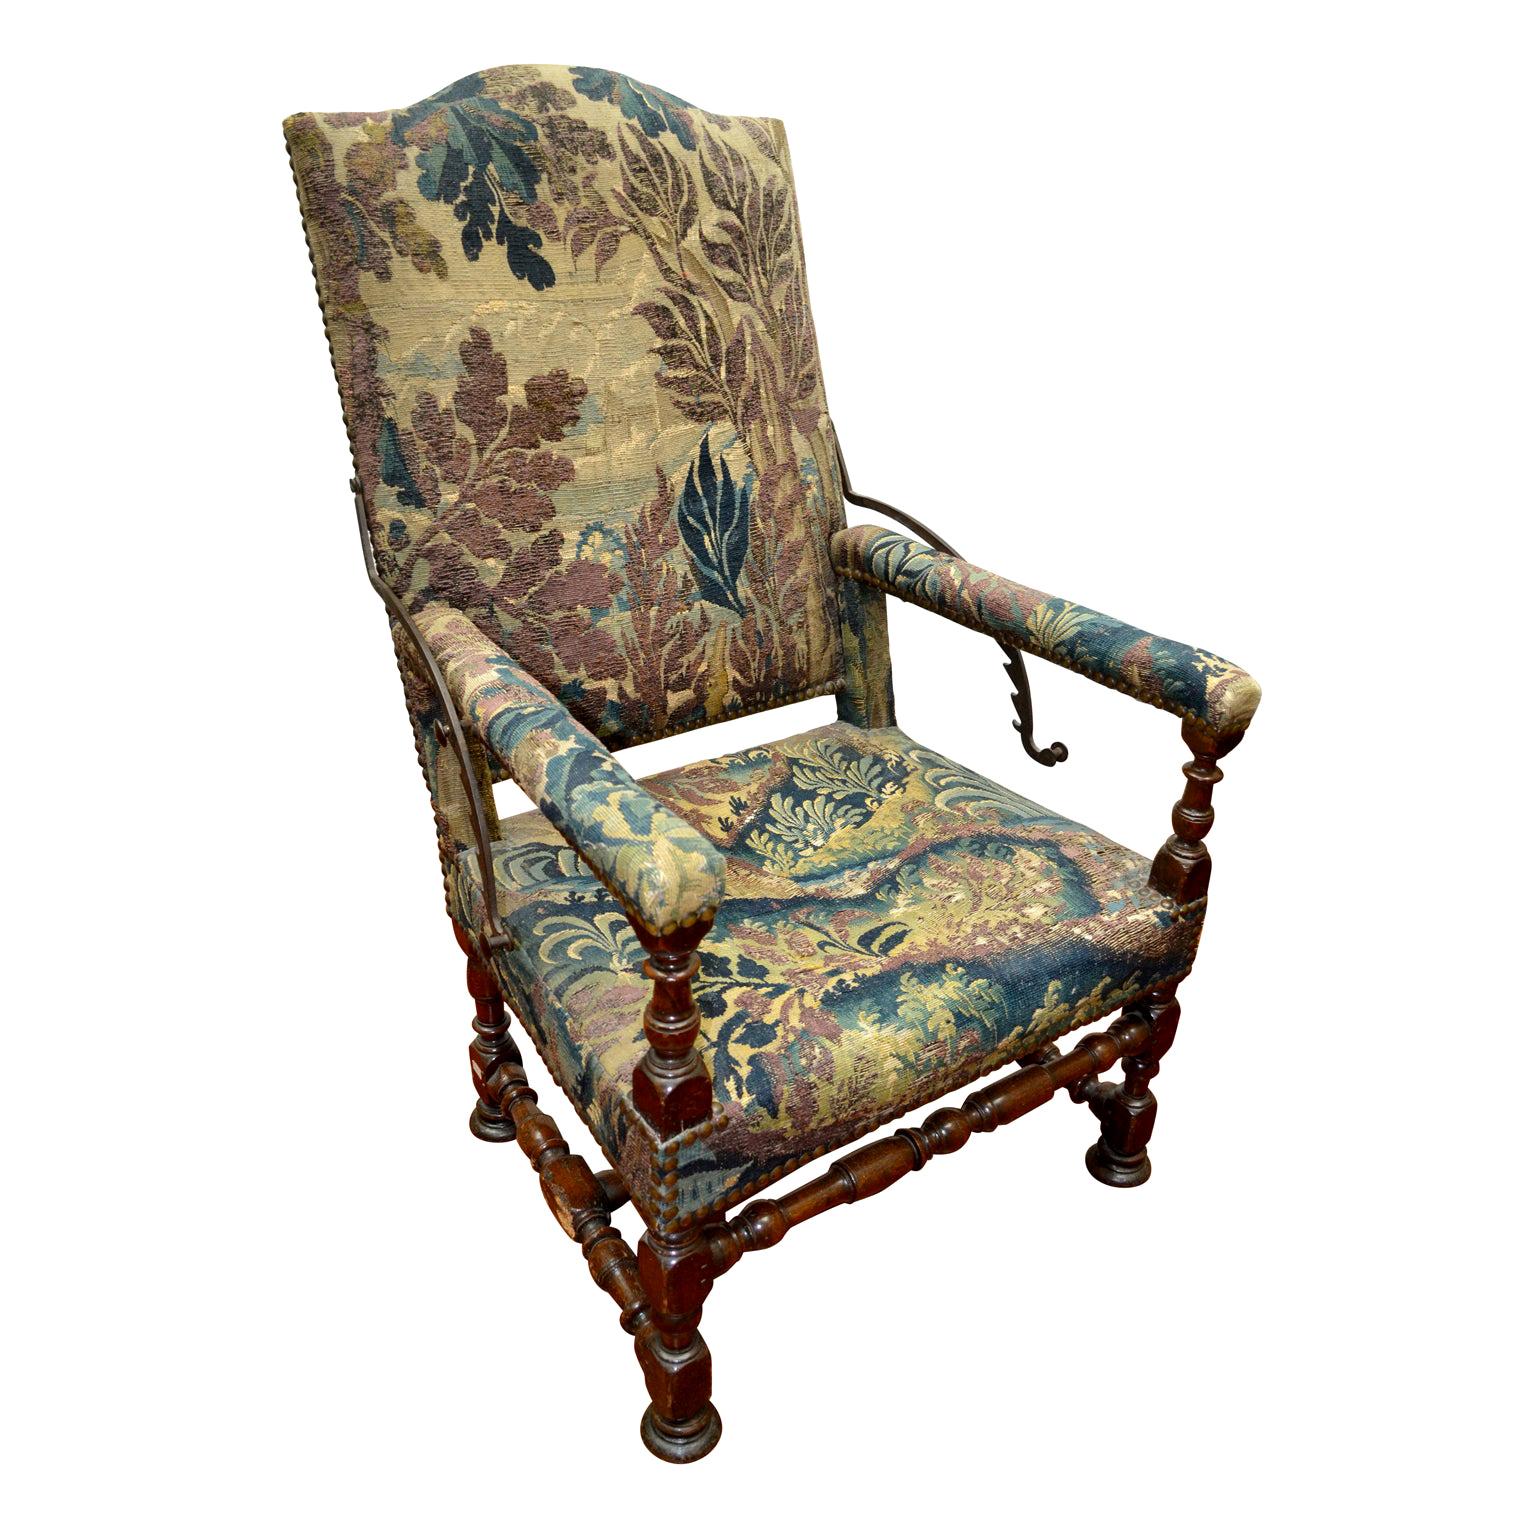 French Tapestry Reclining Armchair, a Veritable Medieval La-Z-boy